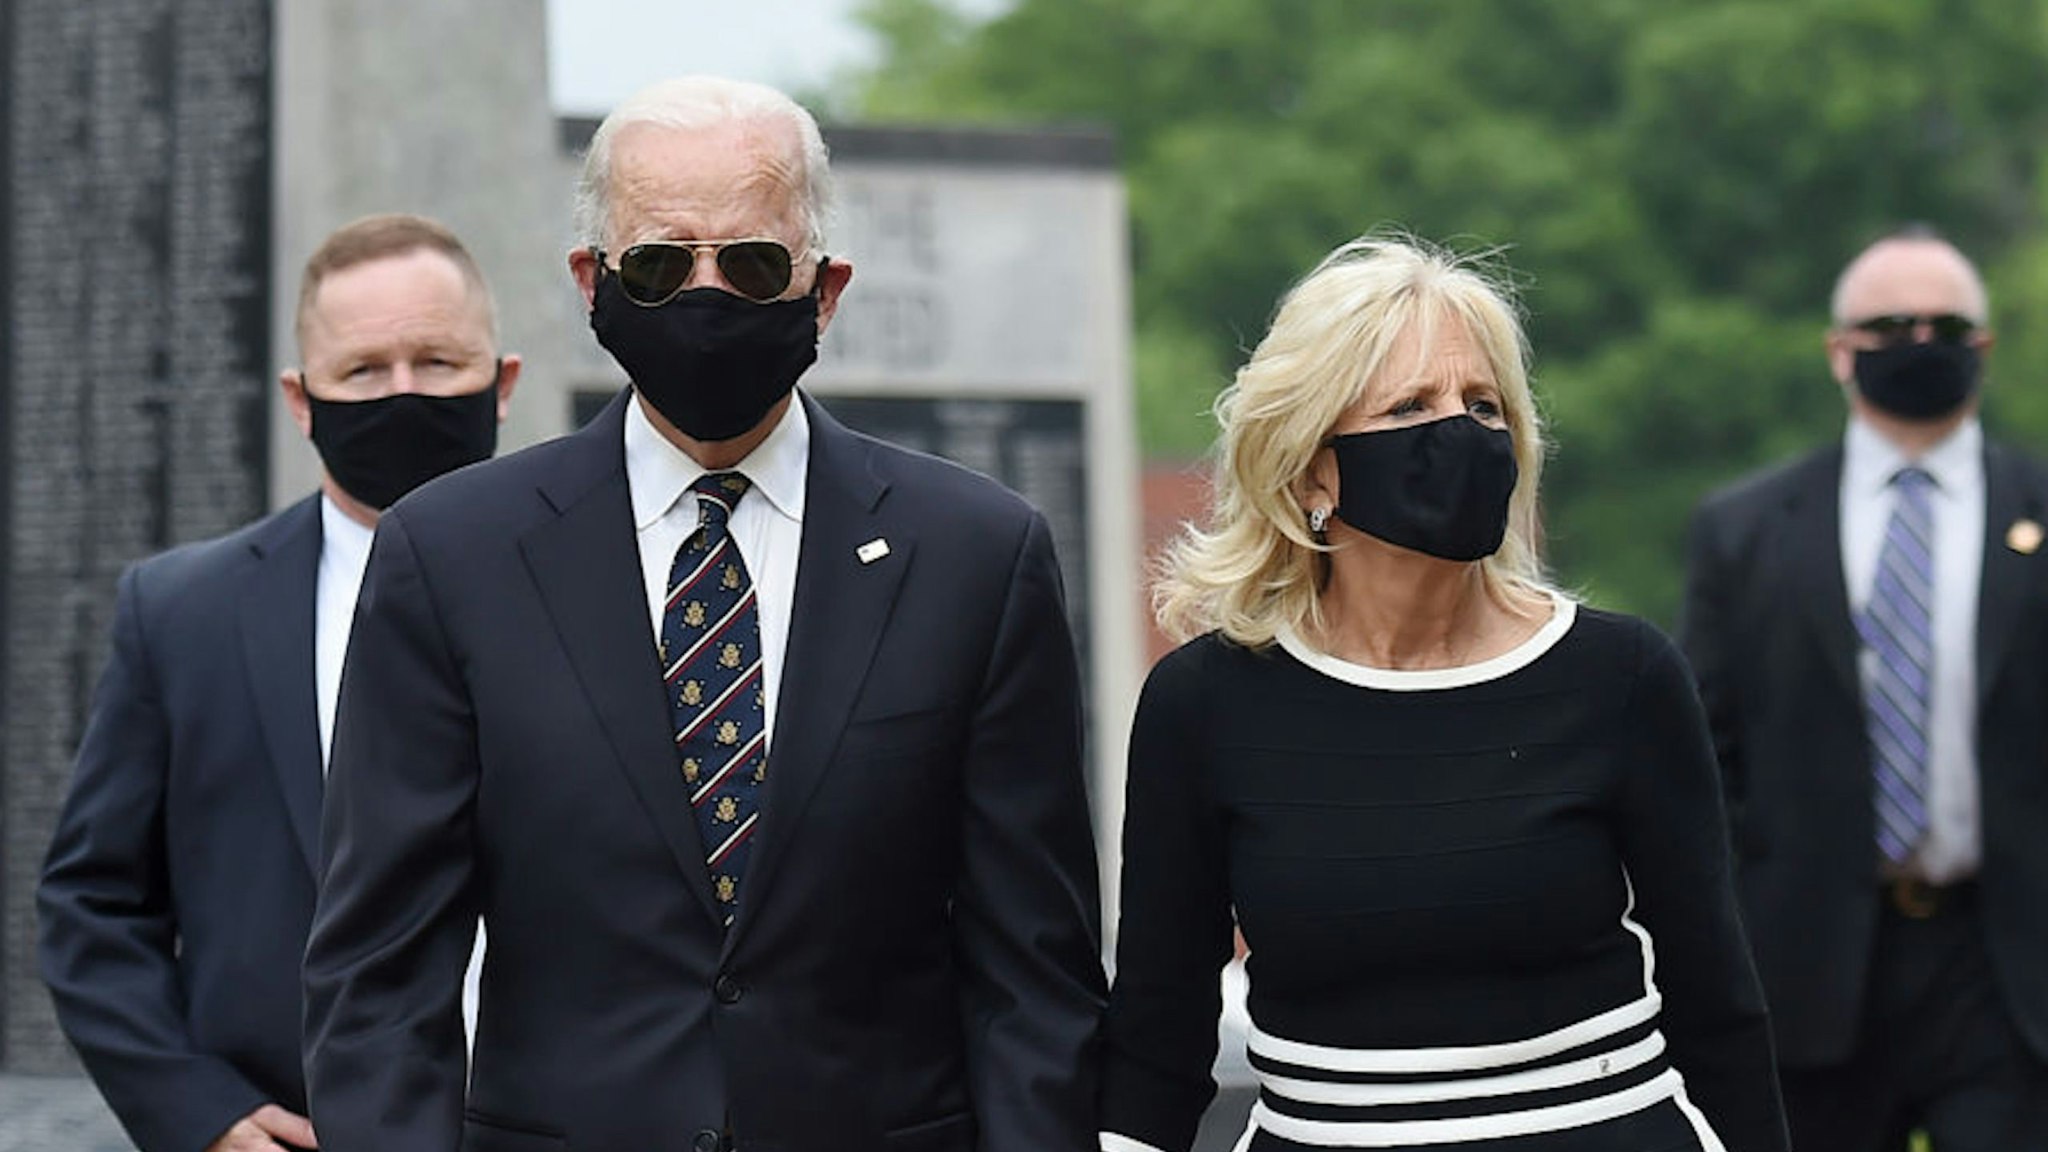 Democratic presidential candidate and former US Vice President Joe Biden and his wife Jill Biden, leave Delaware Memorial Bridge Veteran's Memorial Park after paying their respects to fallen service members in Newcastle, Delaware, May 25, 2020.